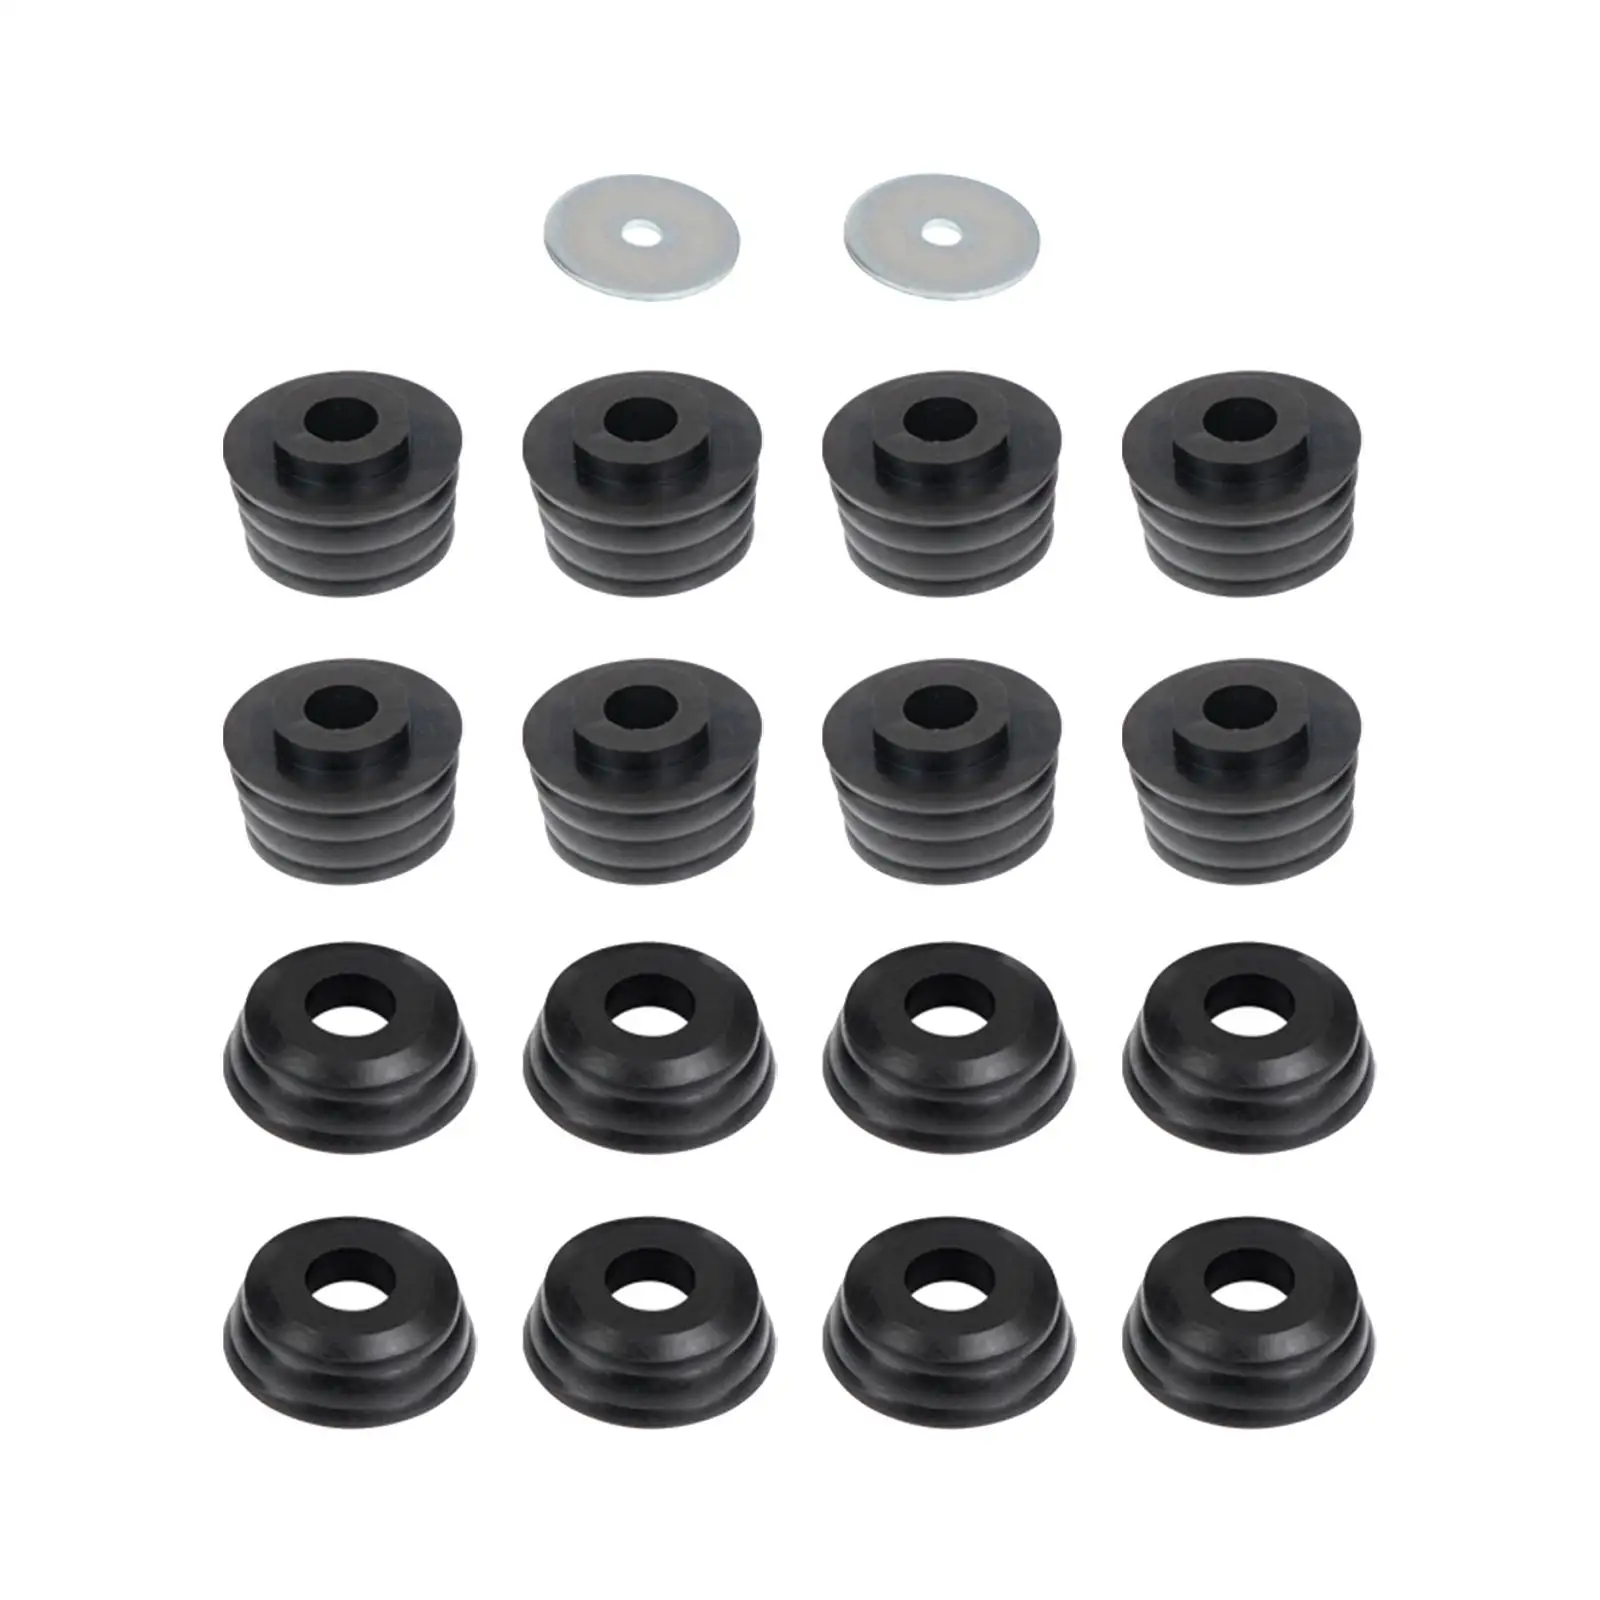 Body Cab Bushing Kit Repair Parts Replacement Black Body Cab Mounts Washers for Chevy Silverado 1999-2014 1500 2500 2WD 4WD